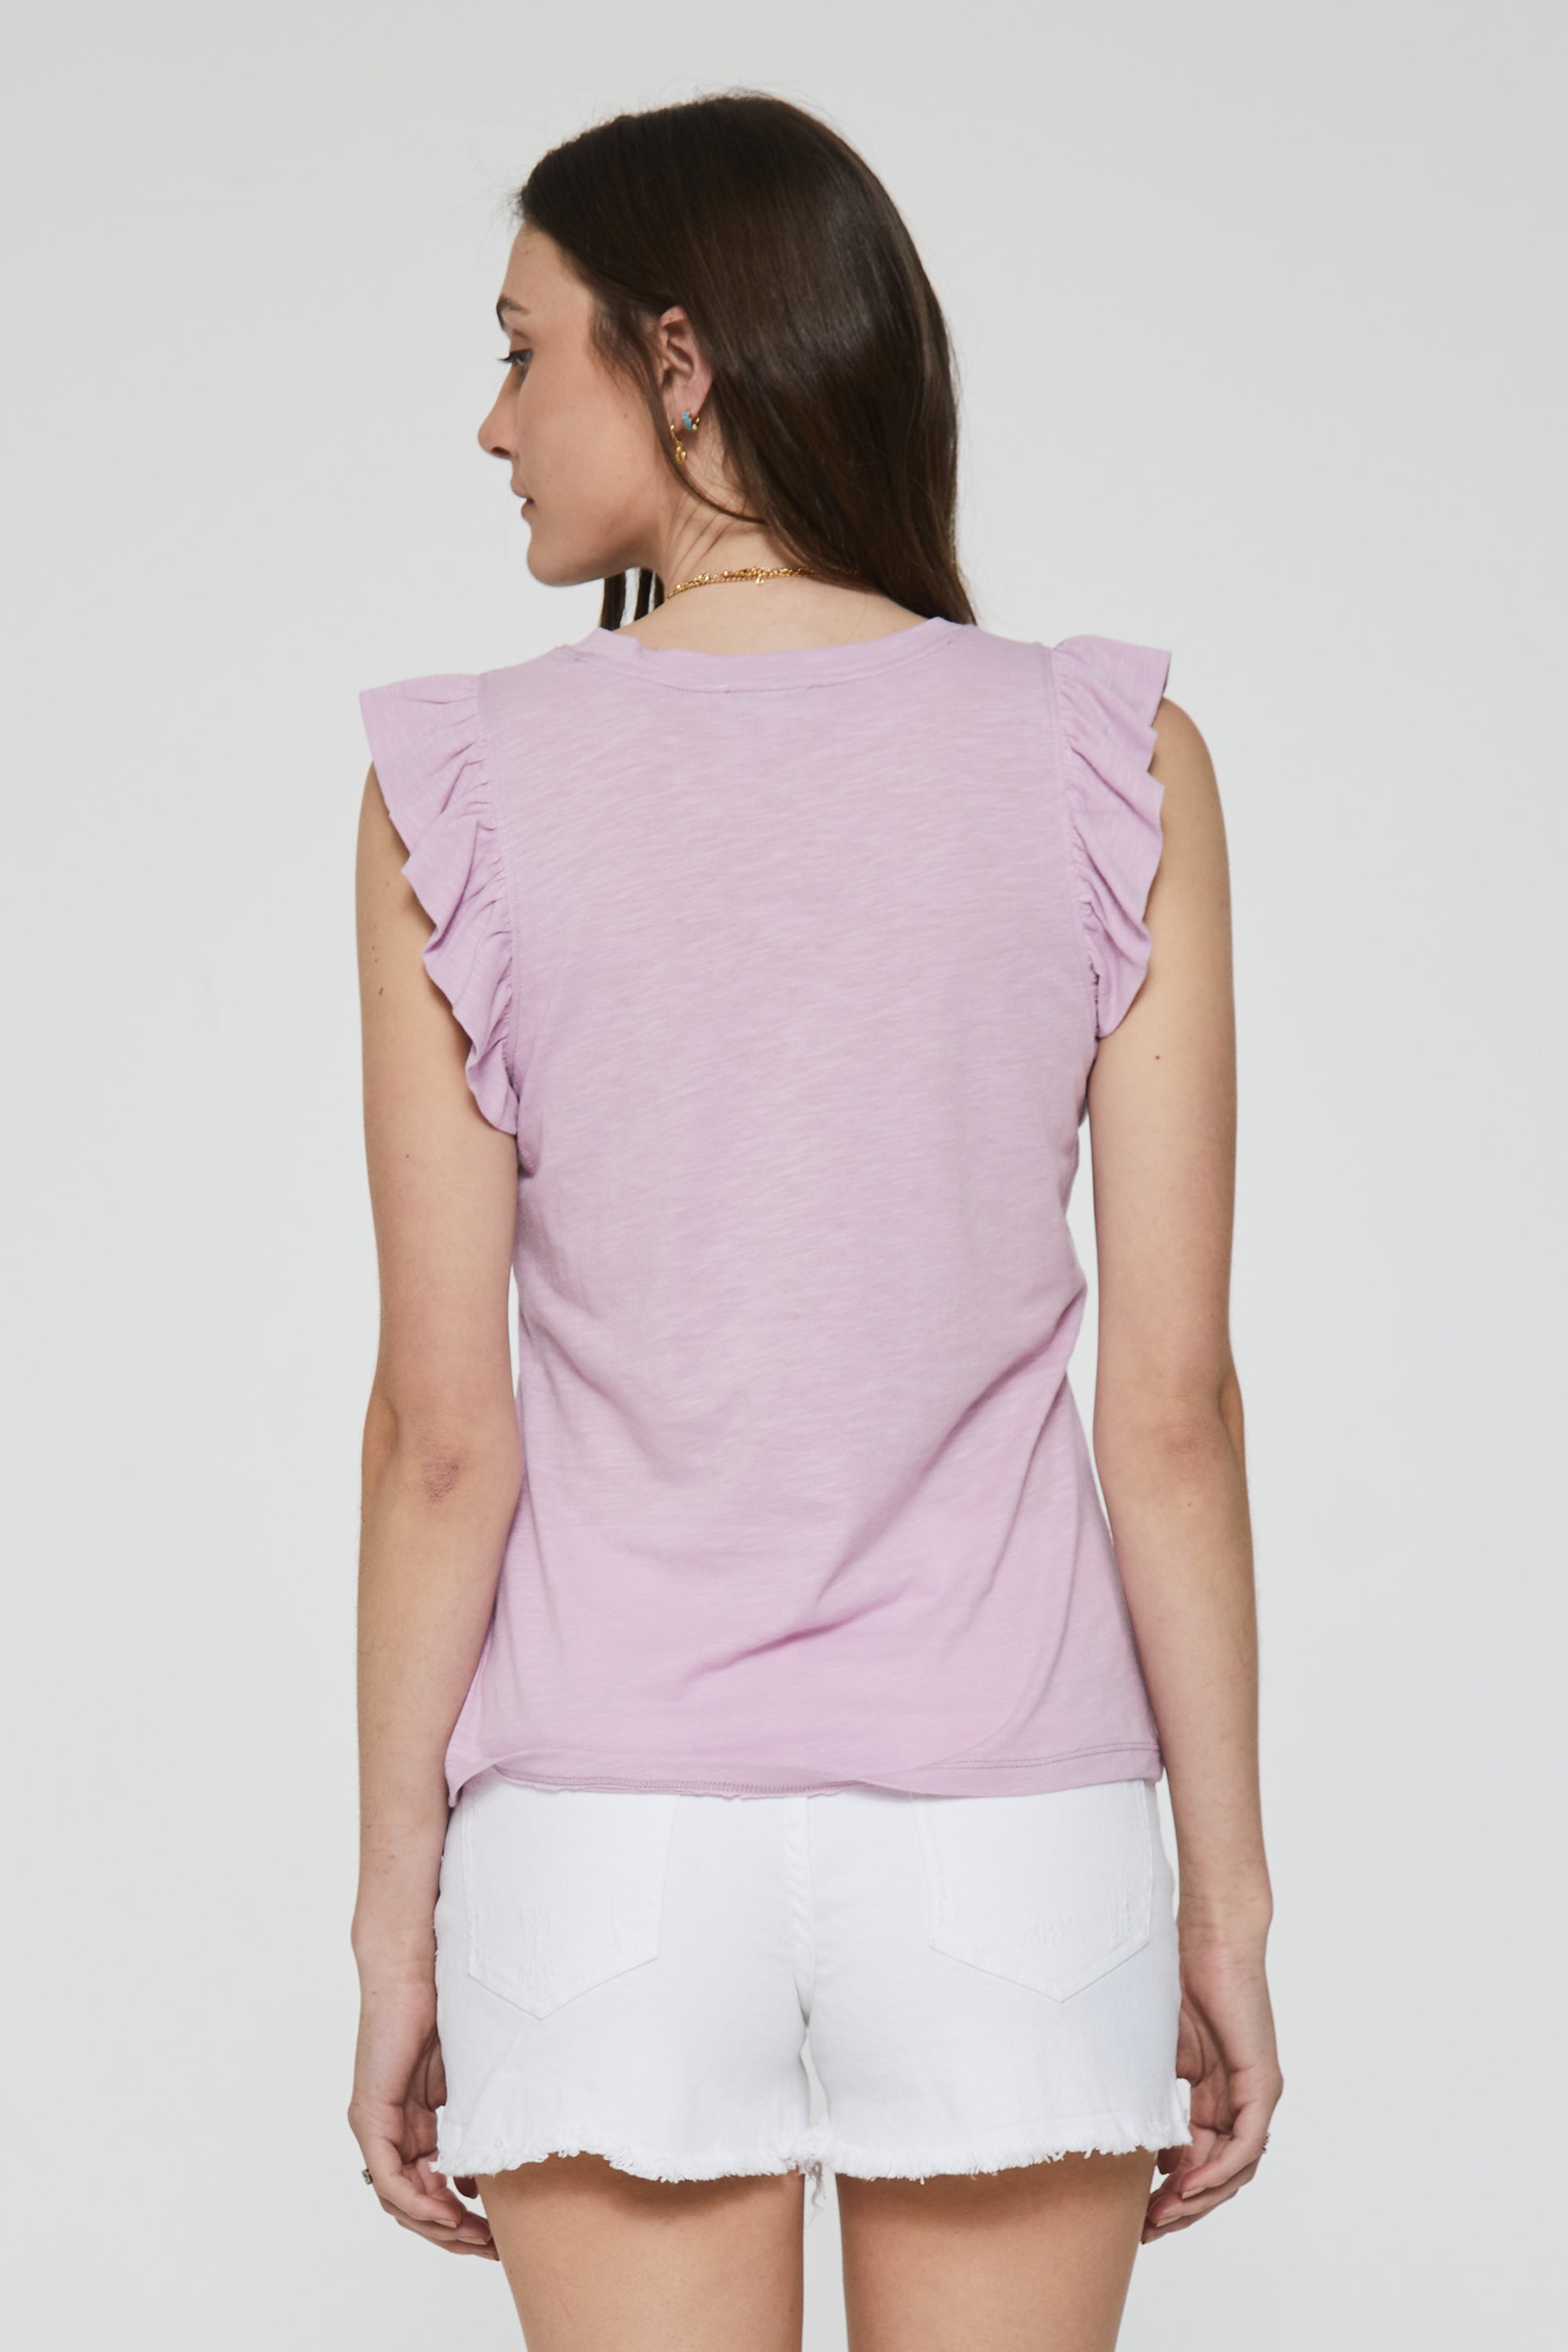 north-ruffle-trimmed-top-verbena-back-image-another-love-clothing